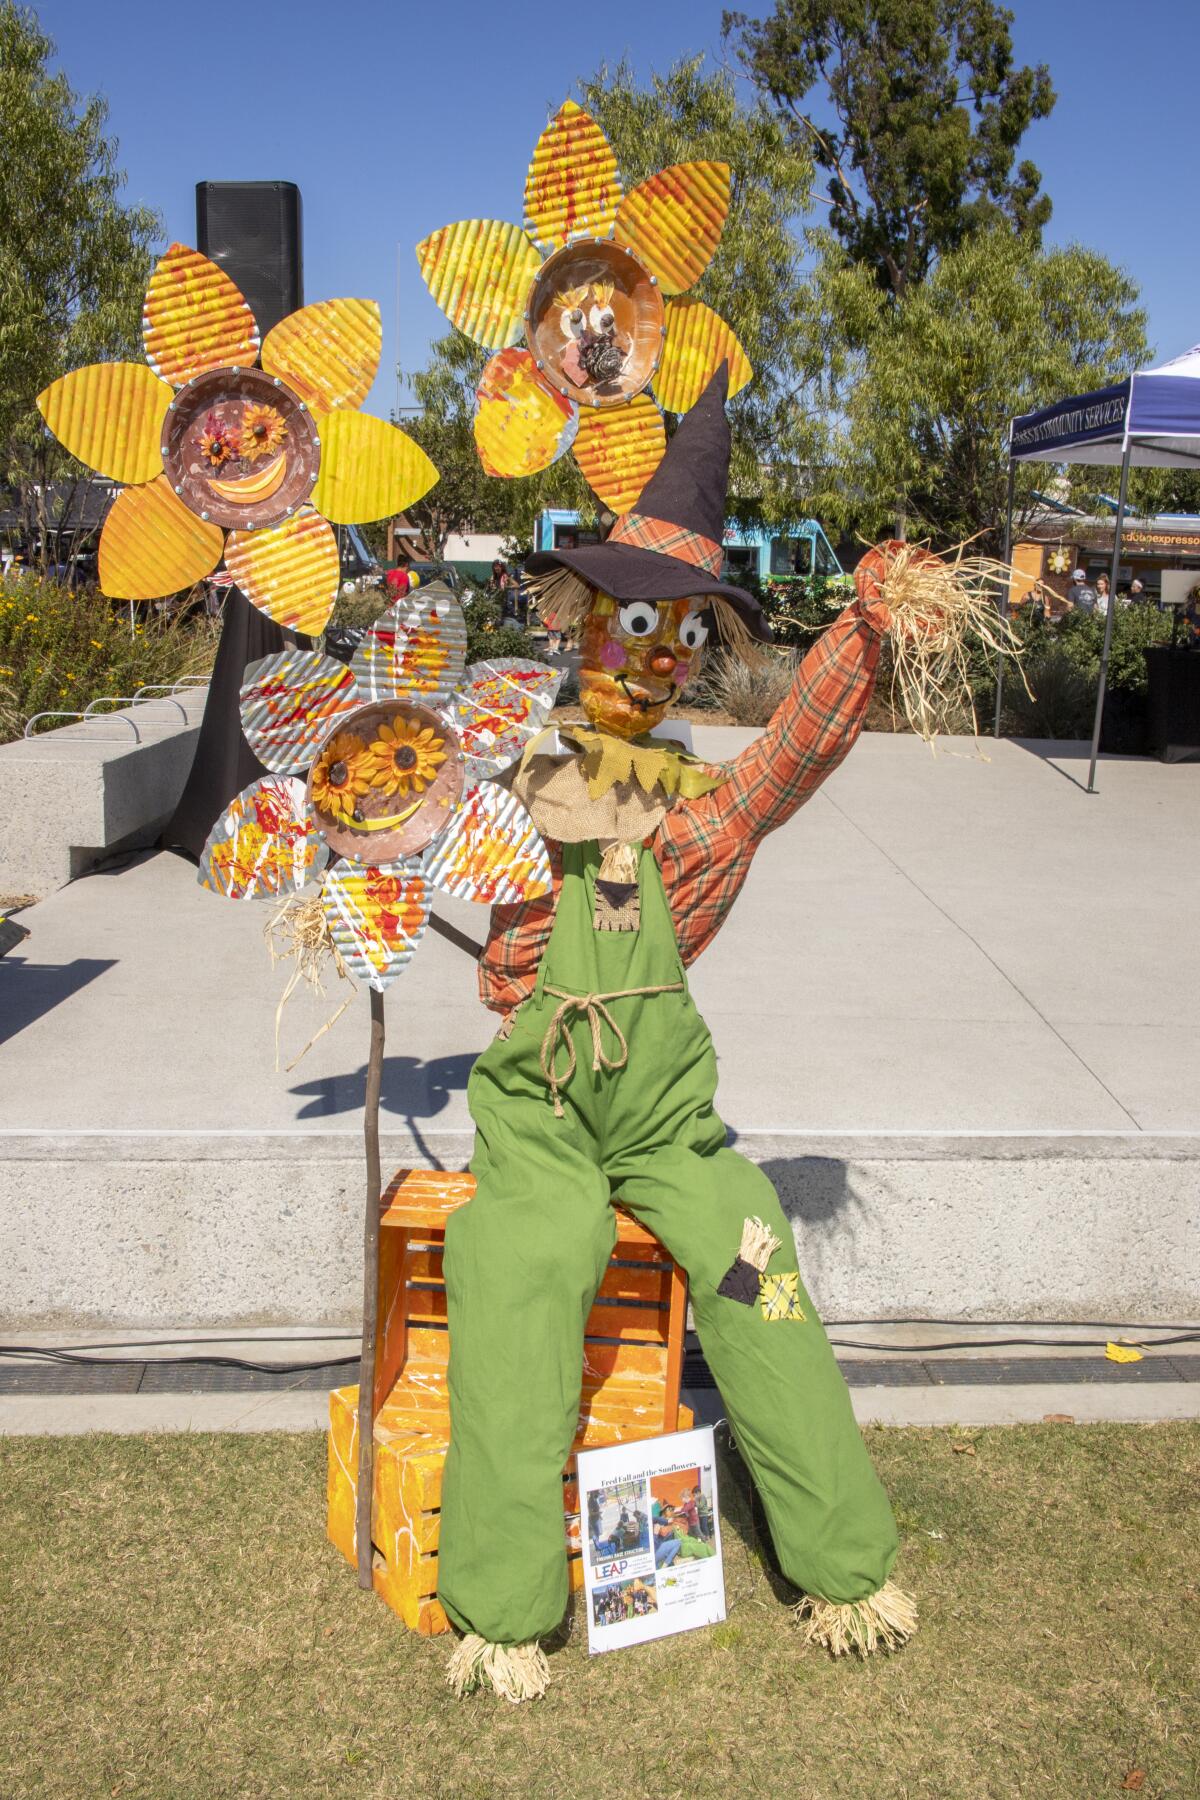 A blossom display adorns a scarecrow entry called "Fred Fall and the Sunflowers" Saturday at Costa Mesa's Lions Park.